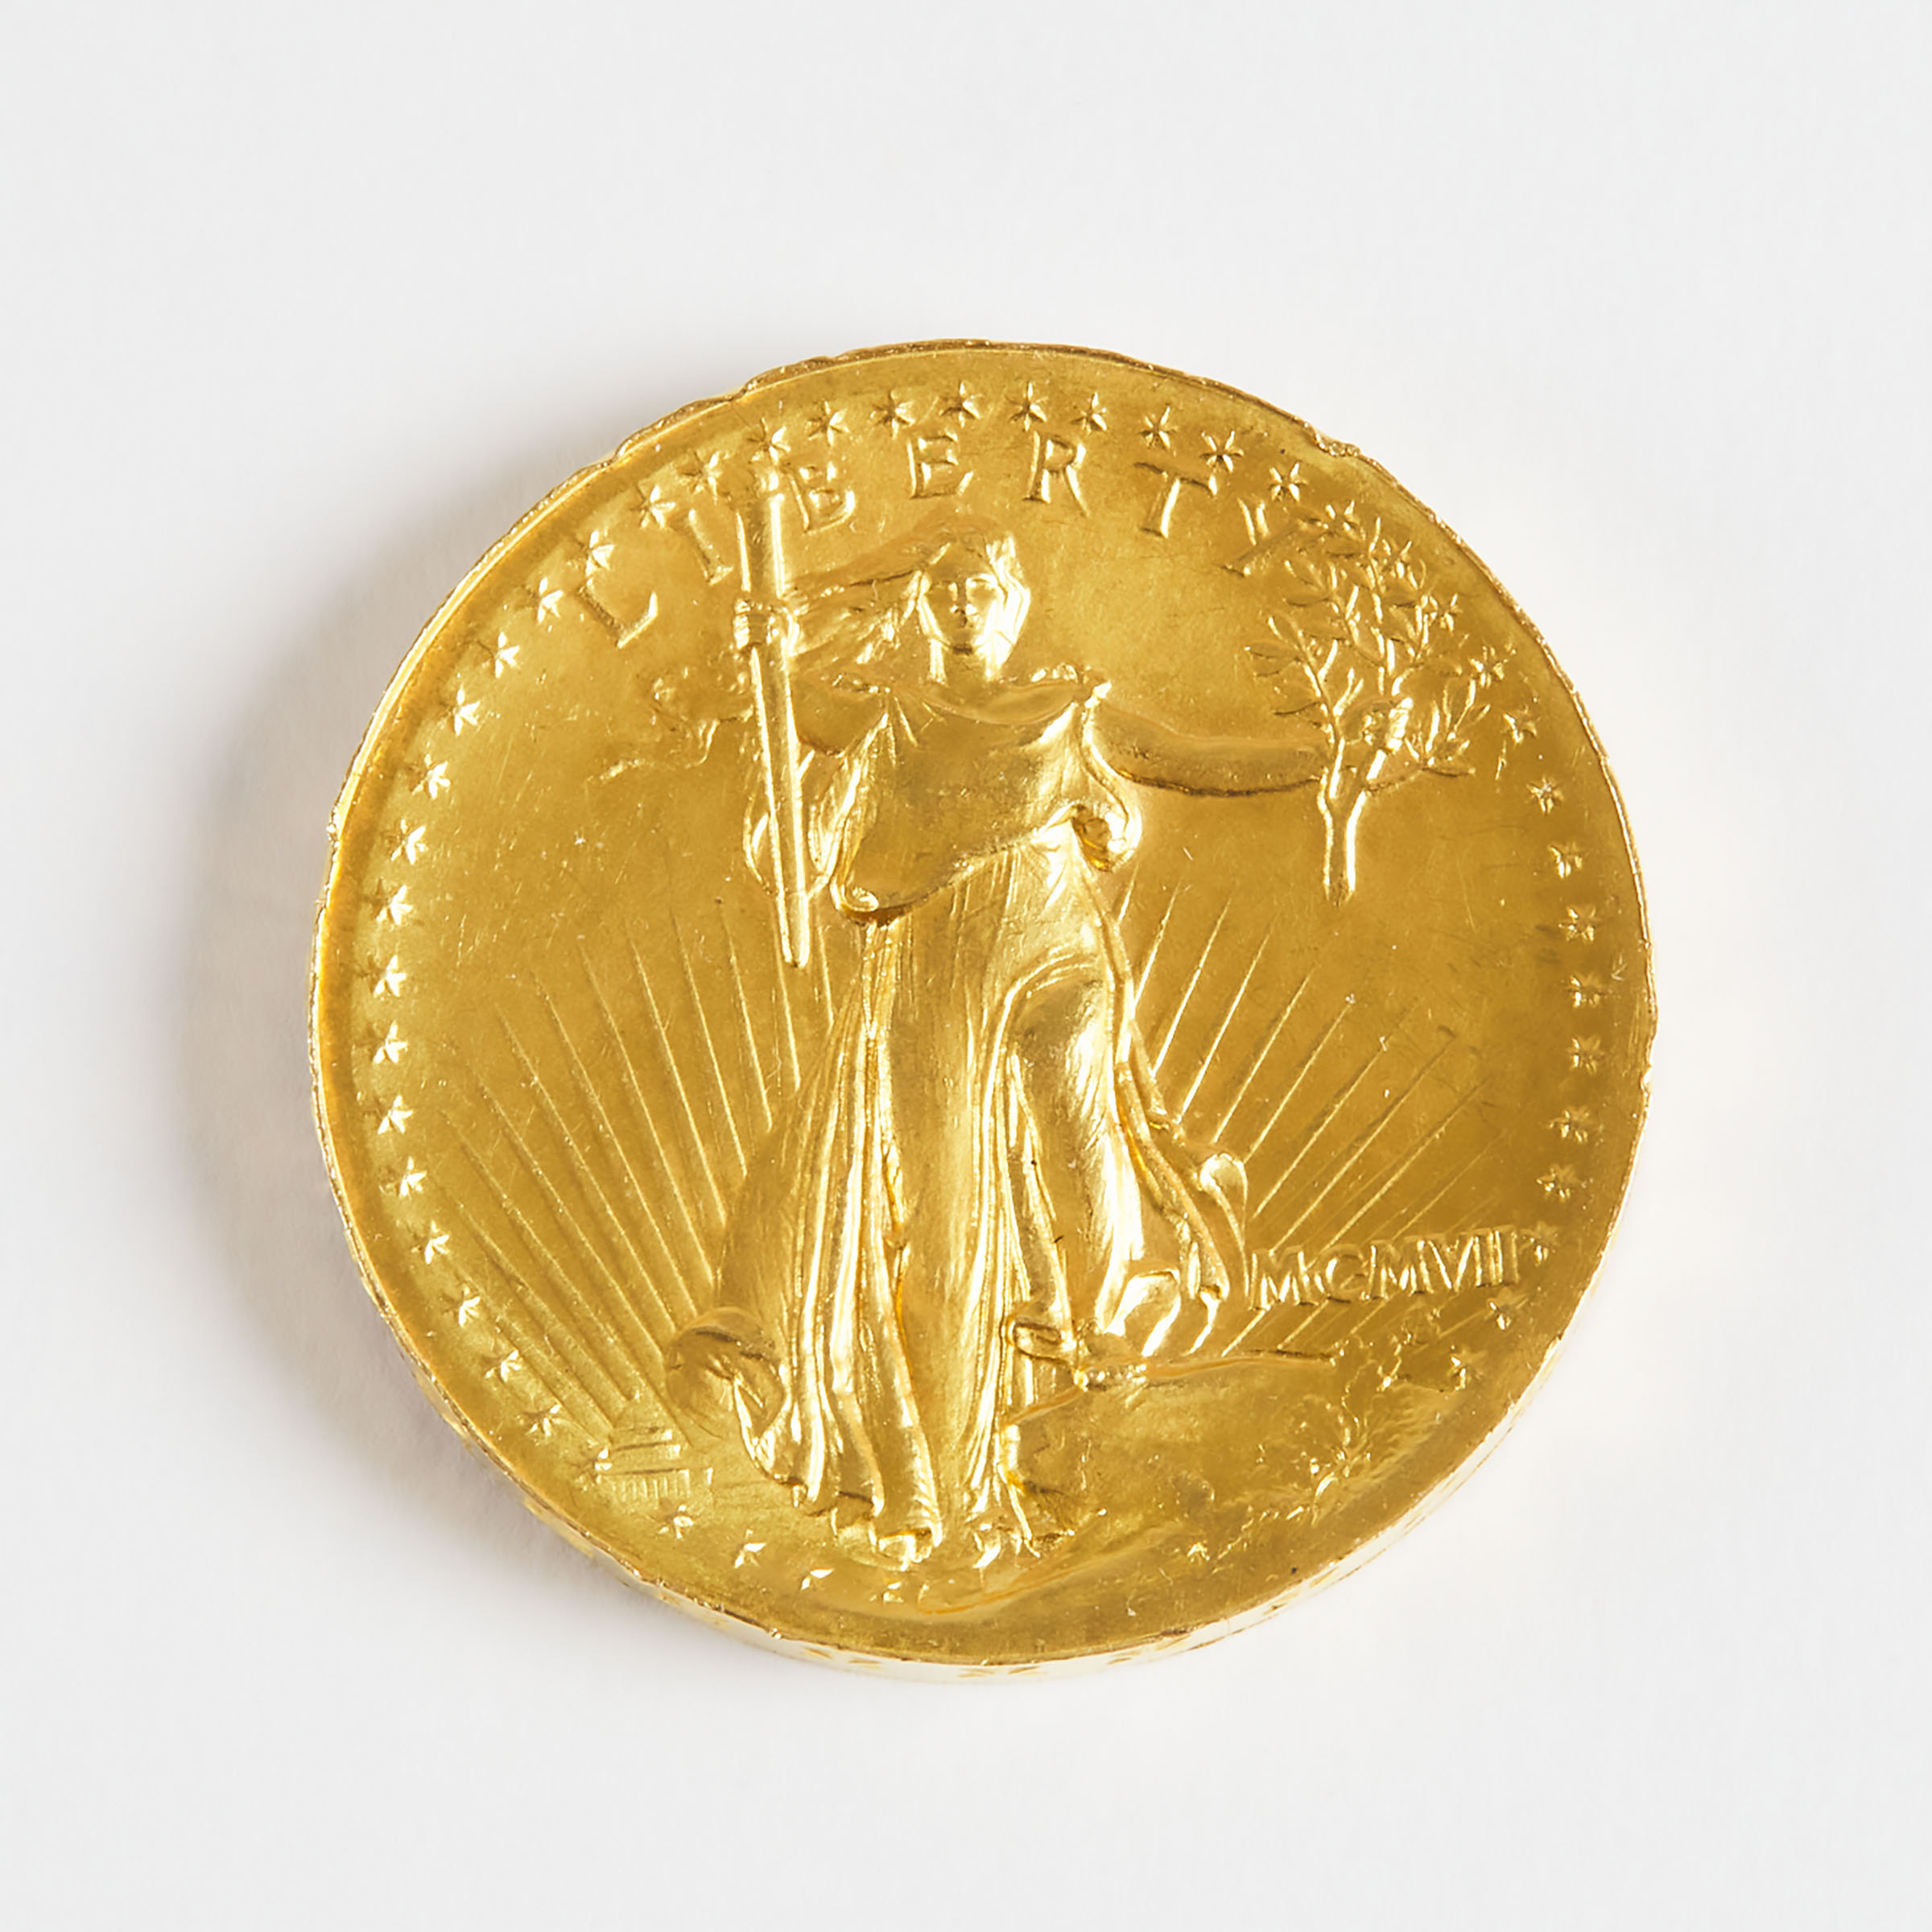 American MCMVII (1907) Double Eagle Gold Coin